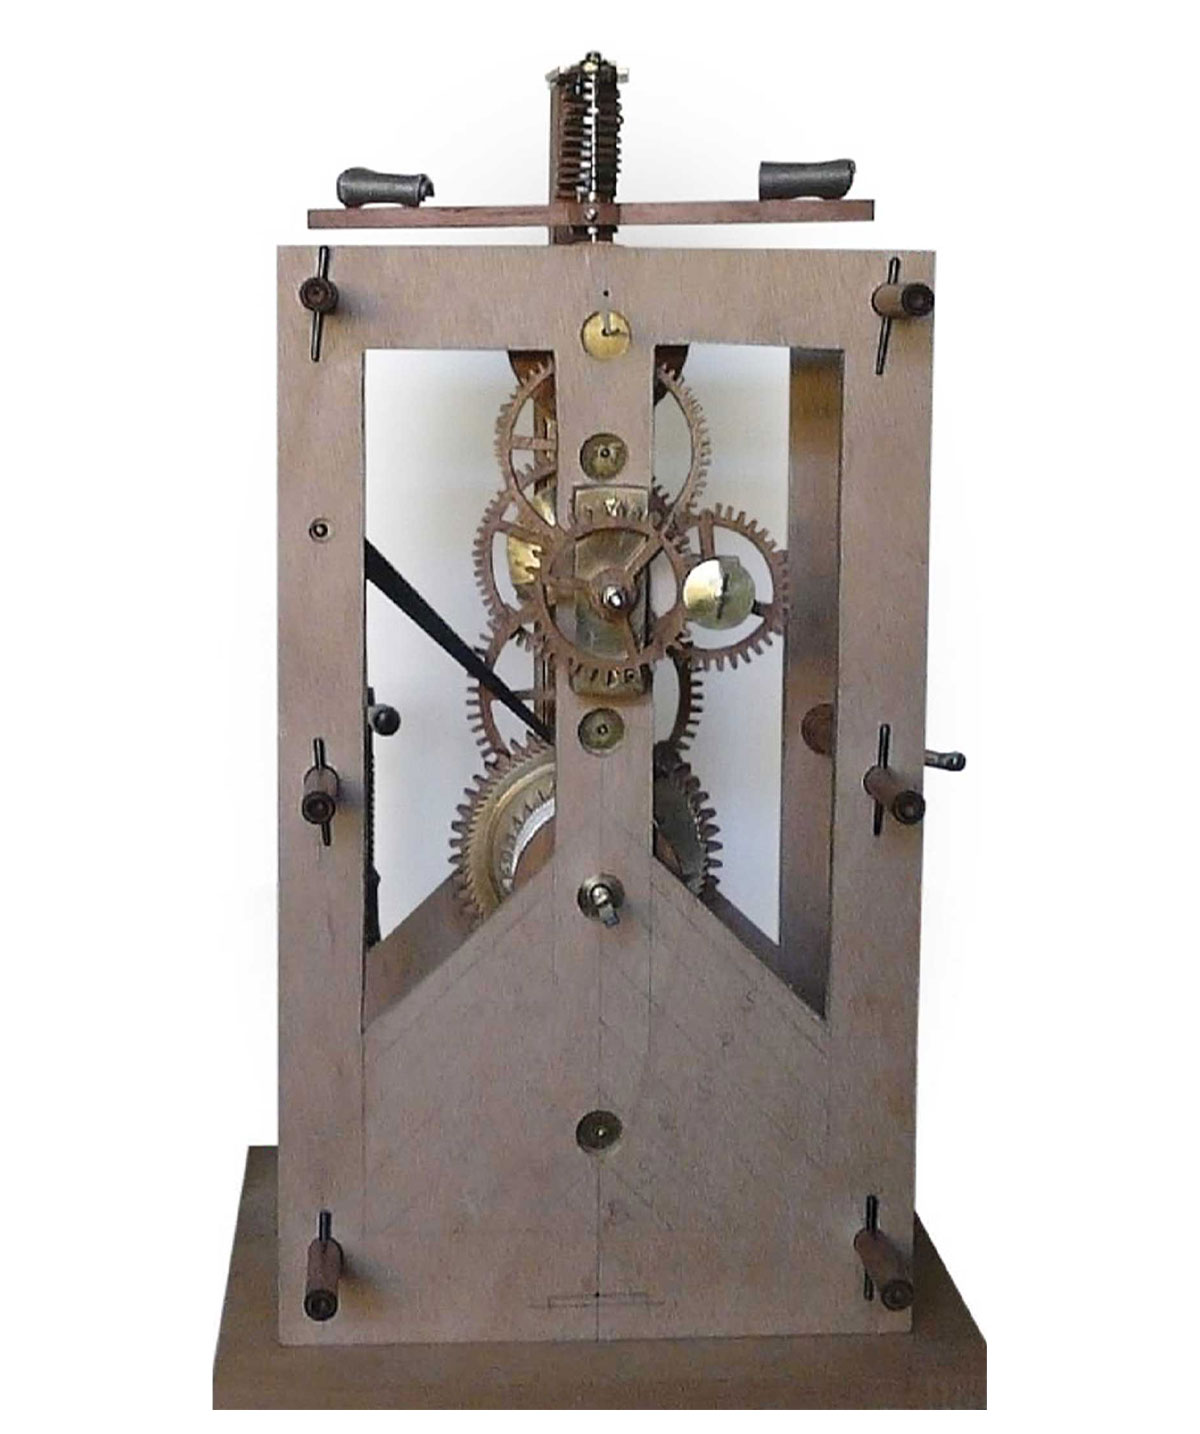 An unfinished case of a clock with gears exposed